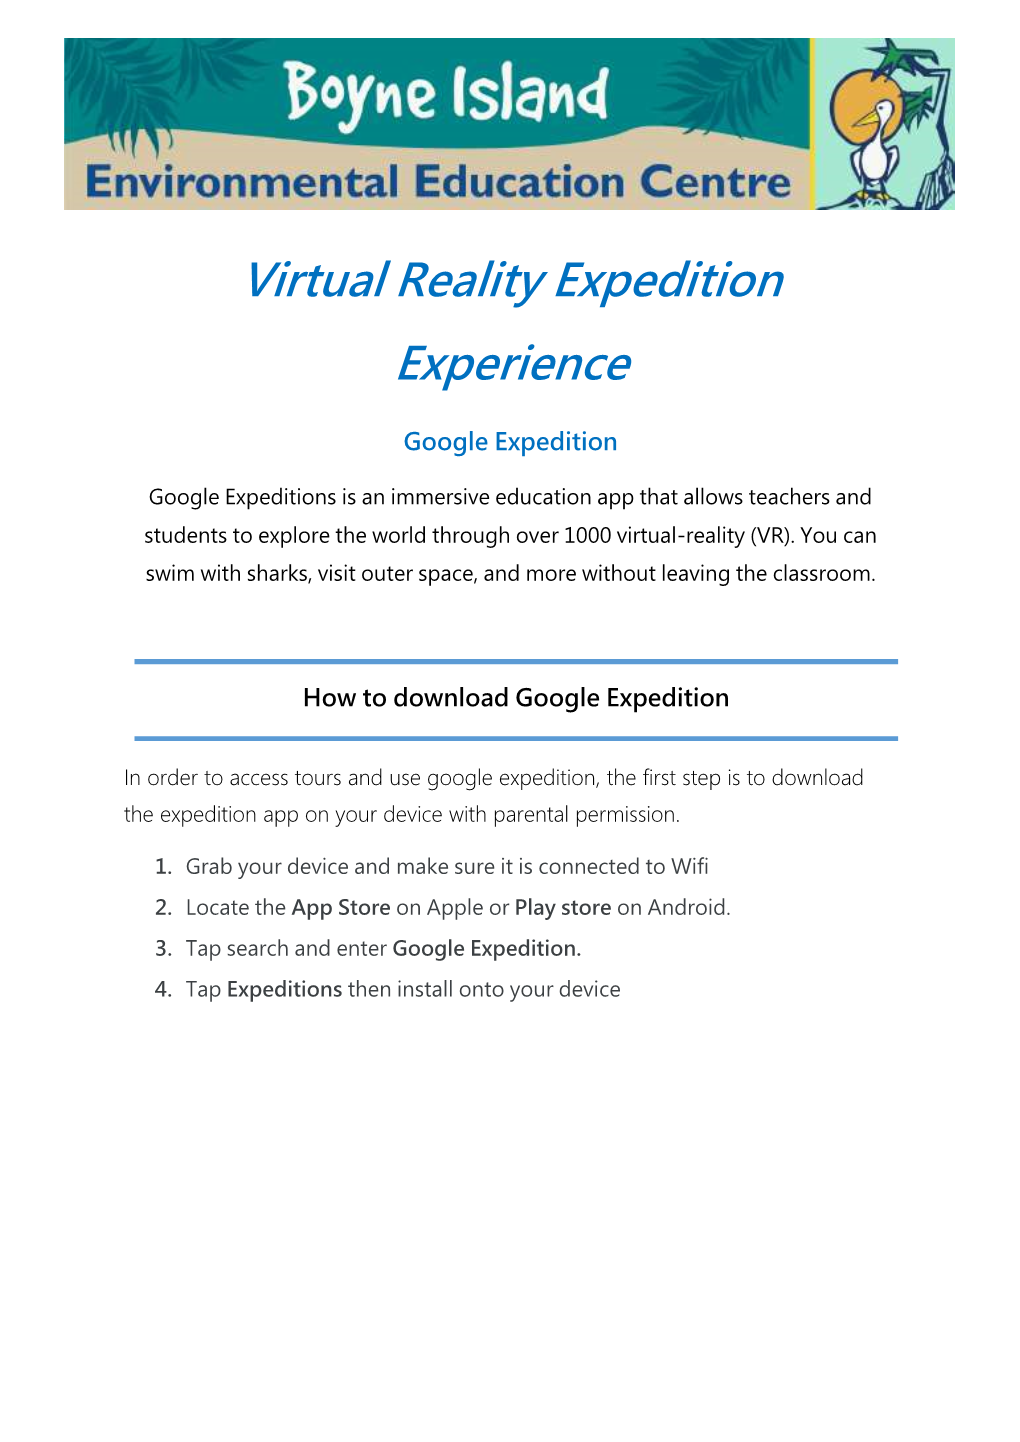 Virtual Reality Expedition Experience